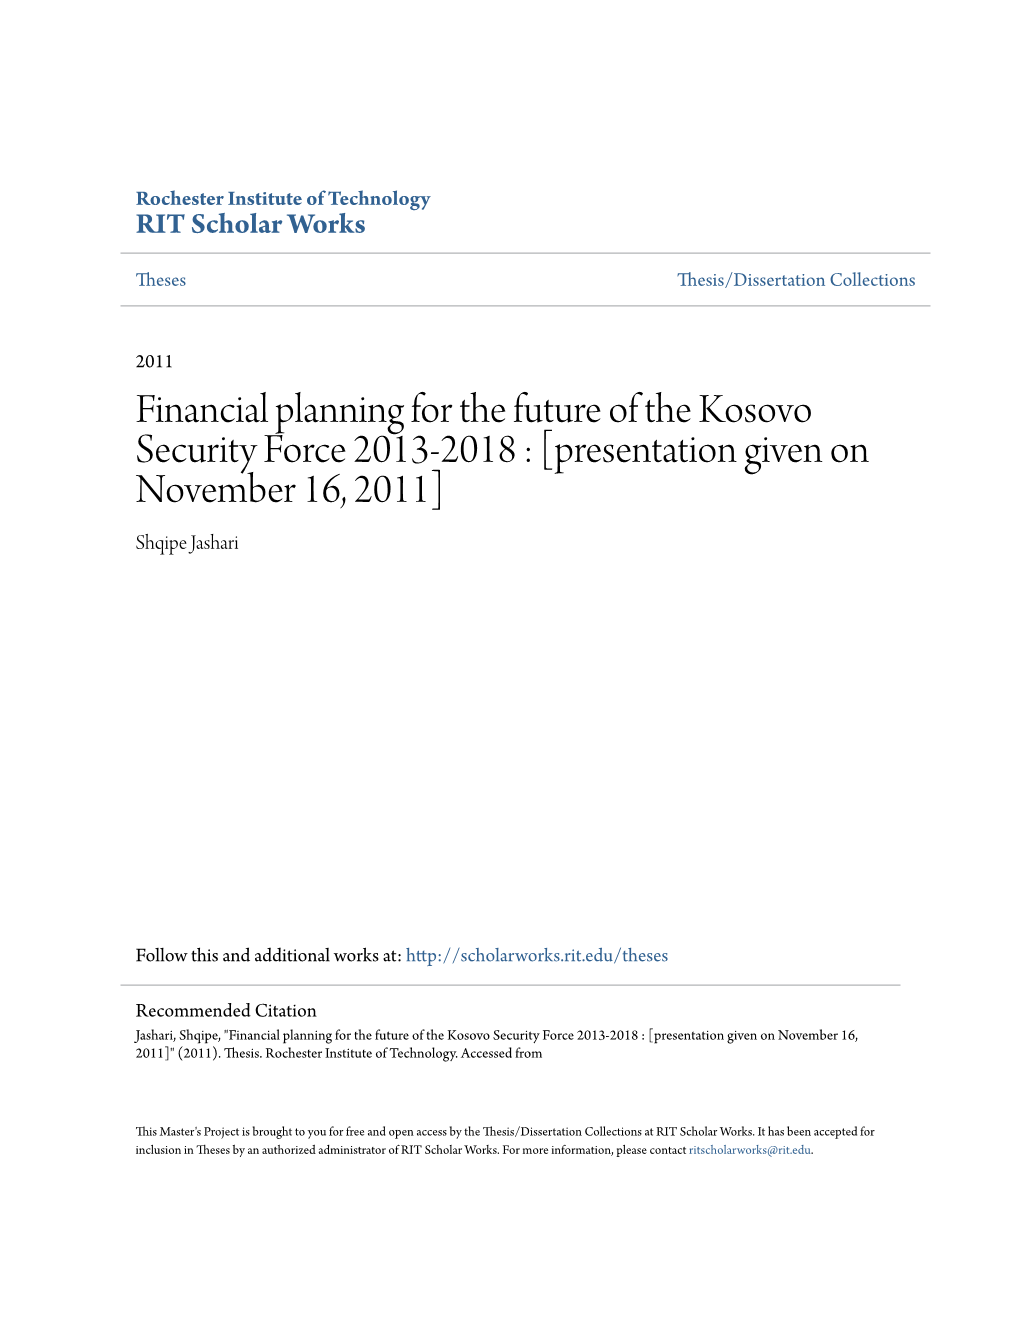 Financial Planning for the Future of the Kosovo Security Force 2013-2018 : [Presentation Given on November 16, 2011] Shqipe Jashari